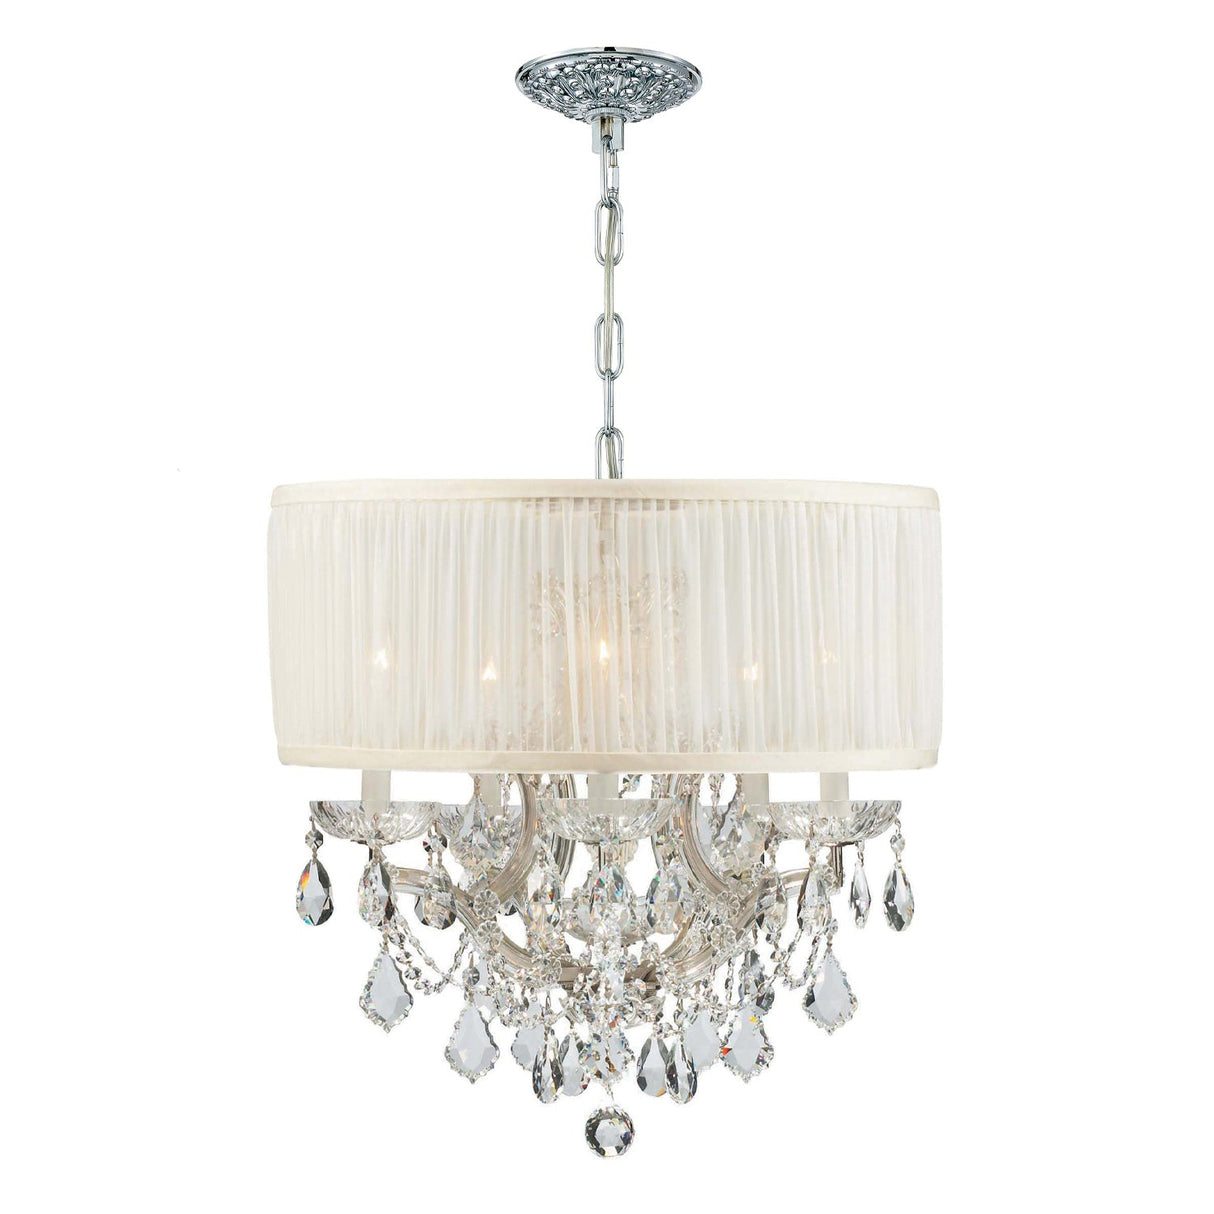 Brentwood 6 Light Crystal Polished Chrome Drum Shade Chandelier 4415-CH-SAW-CLM